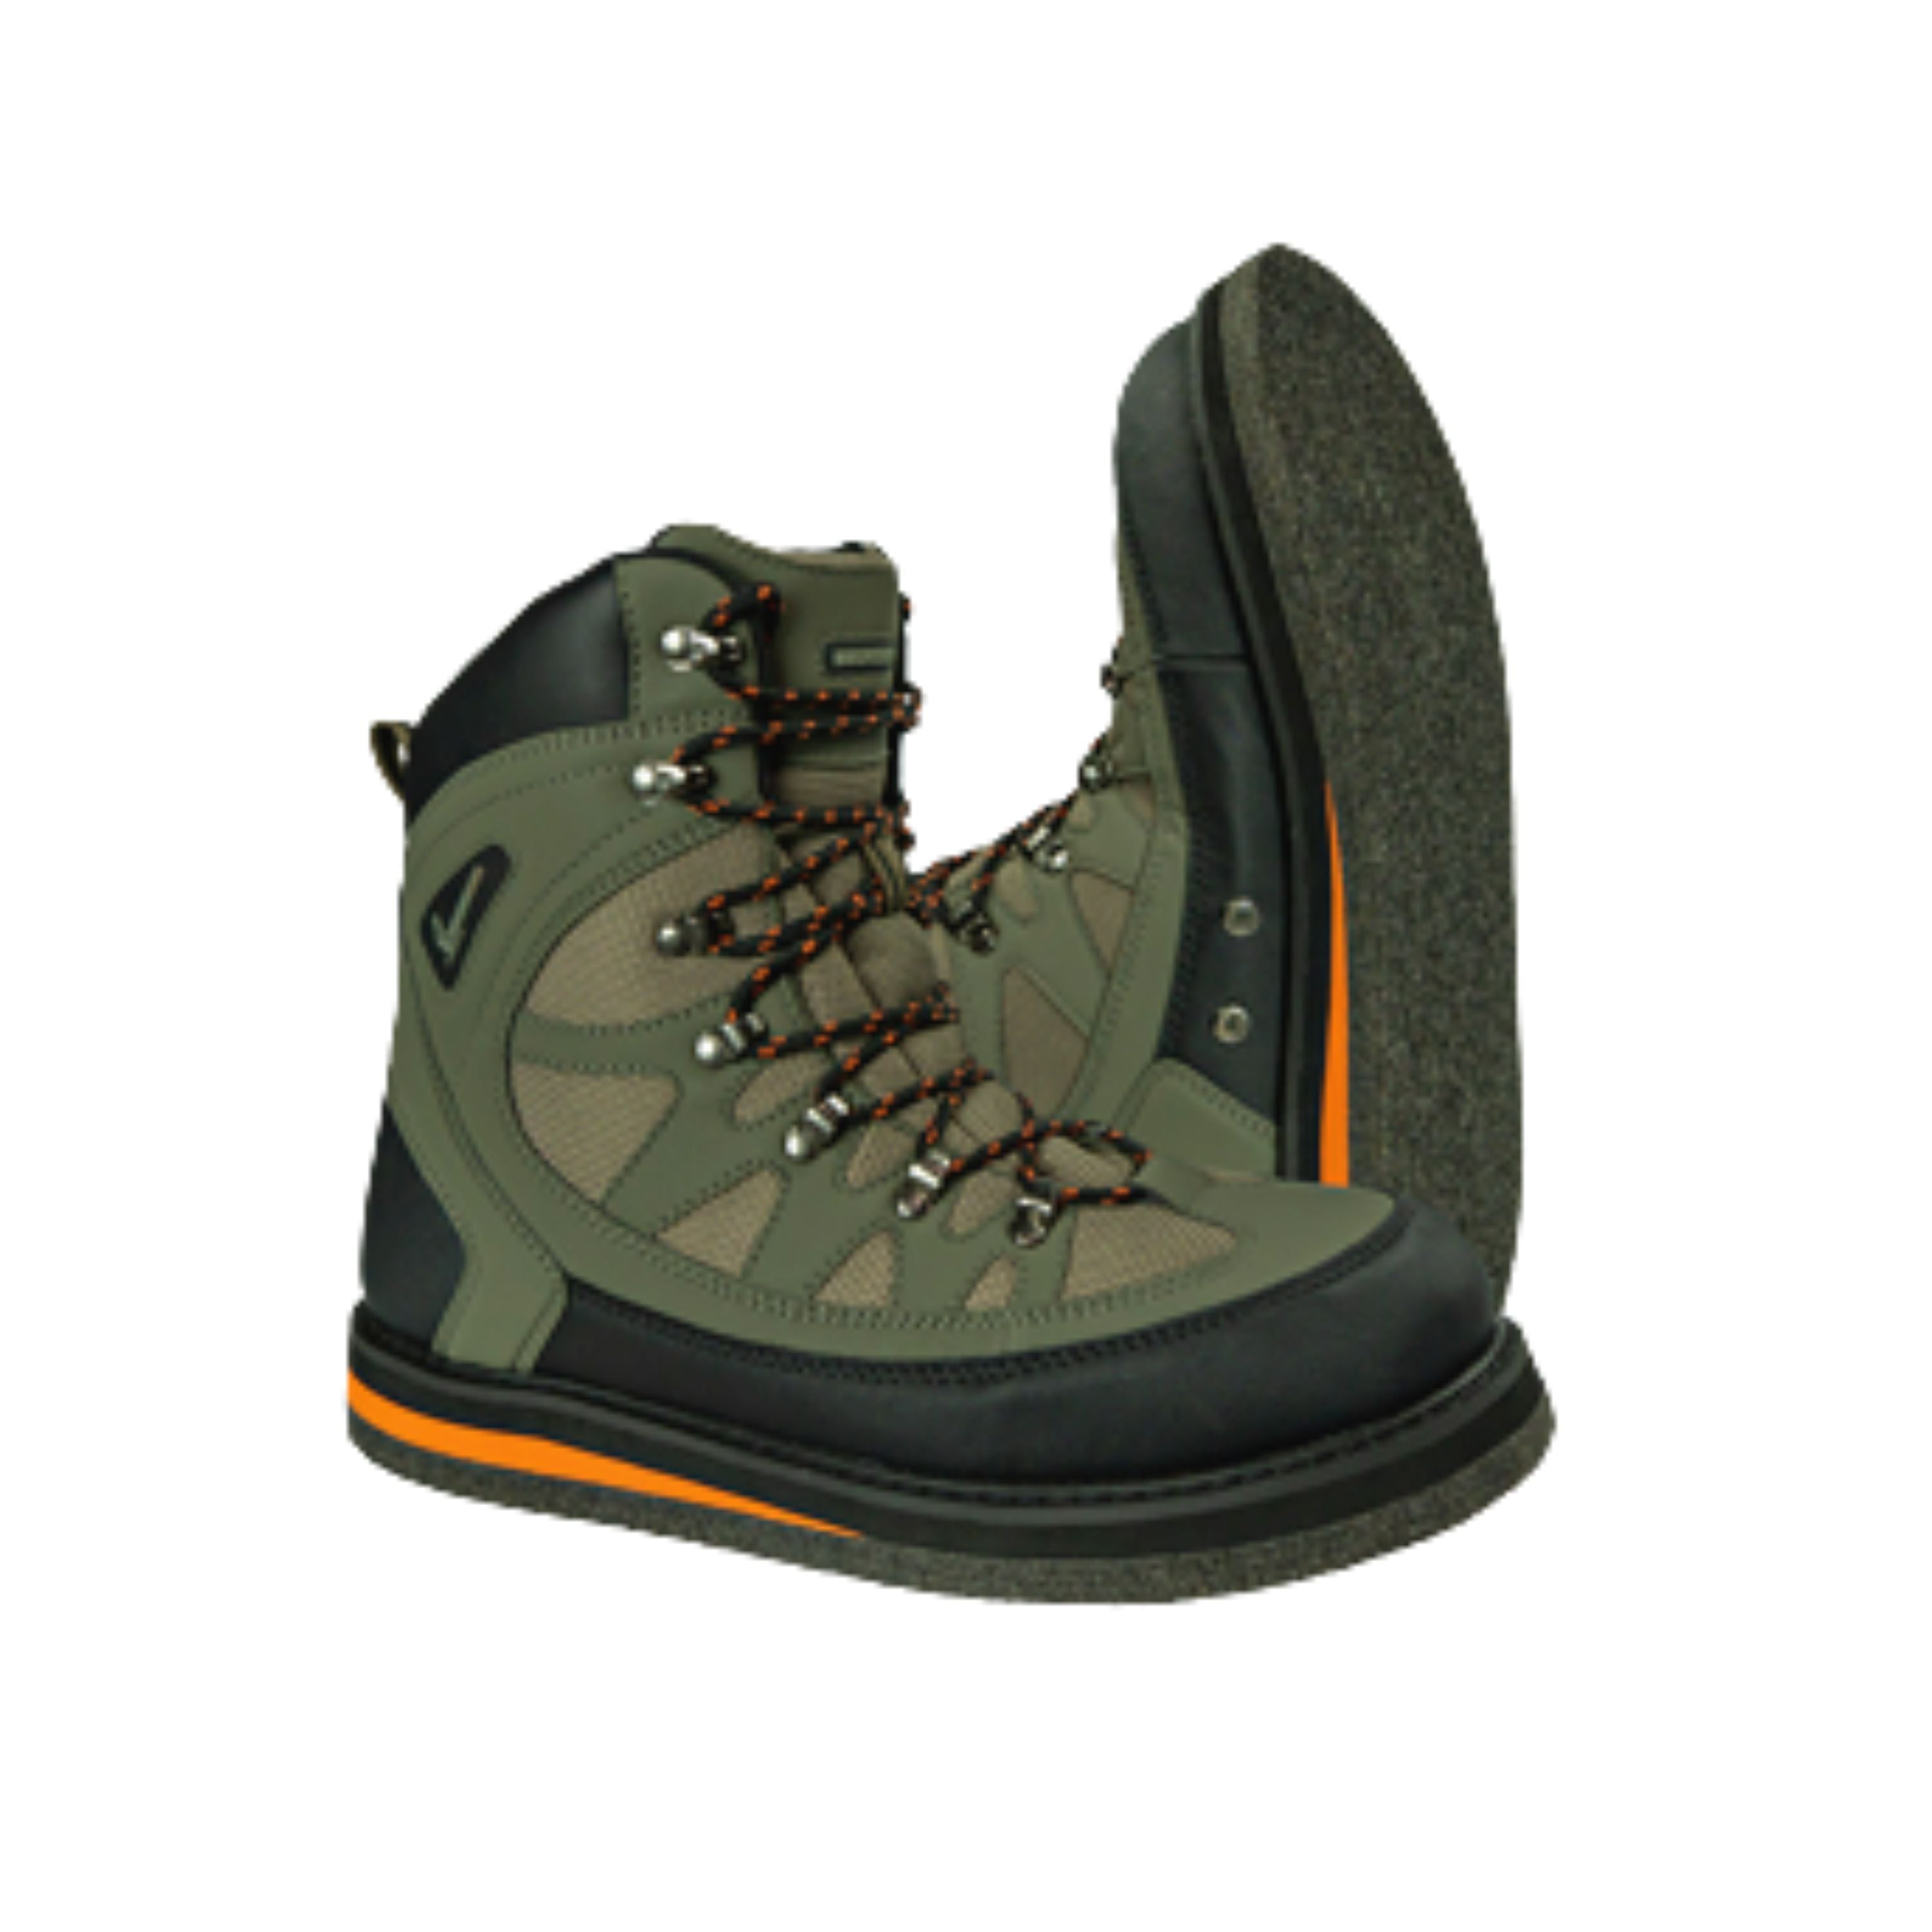 TXS Wading boots